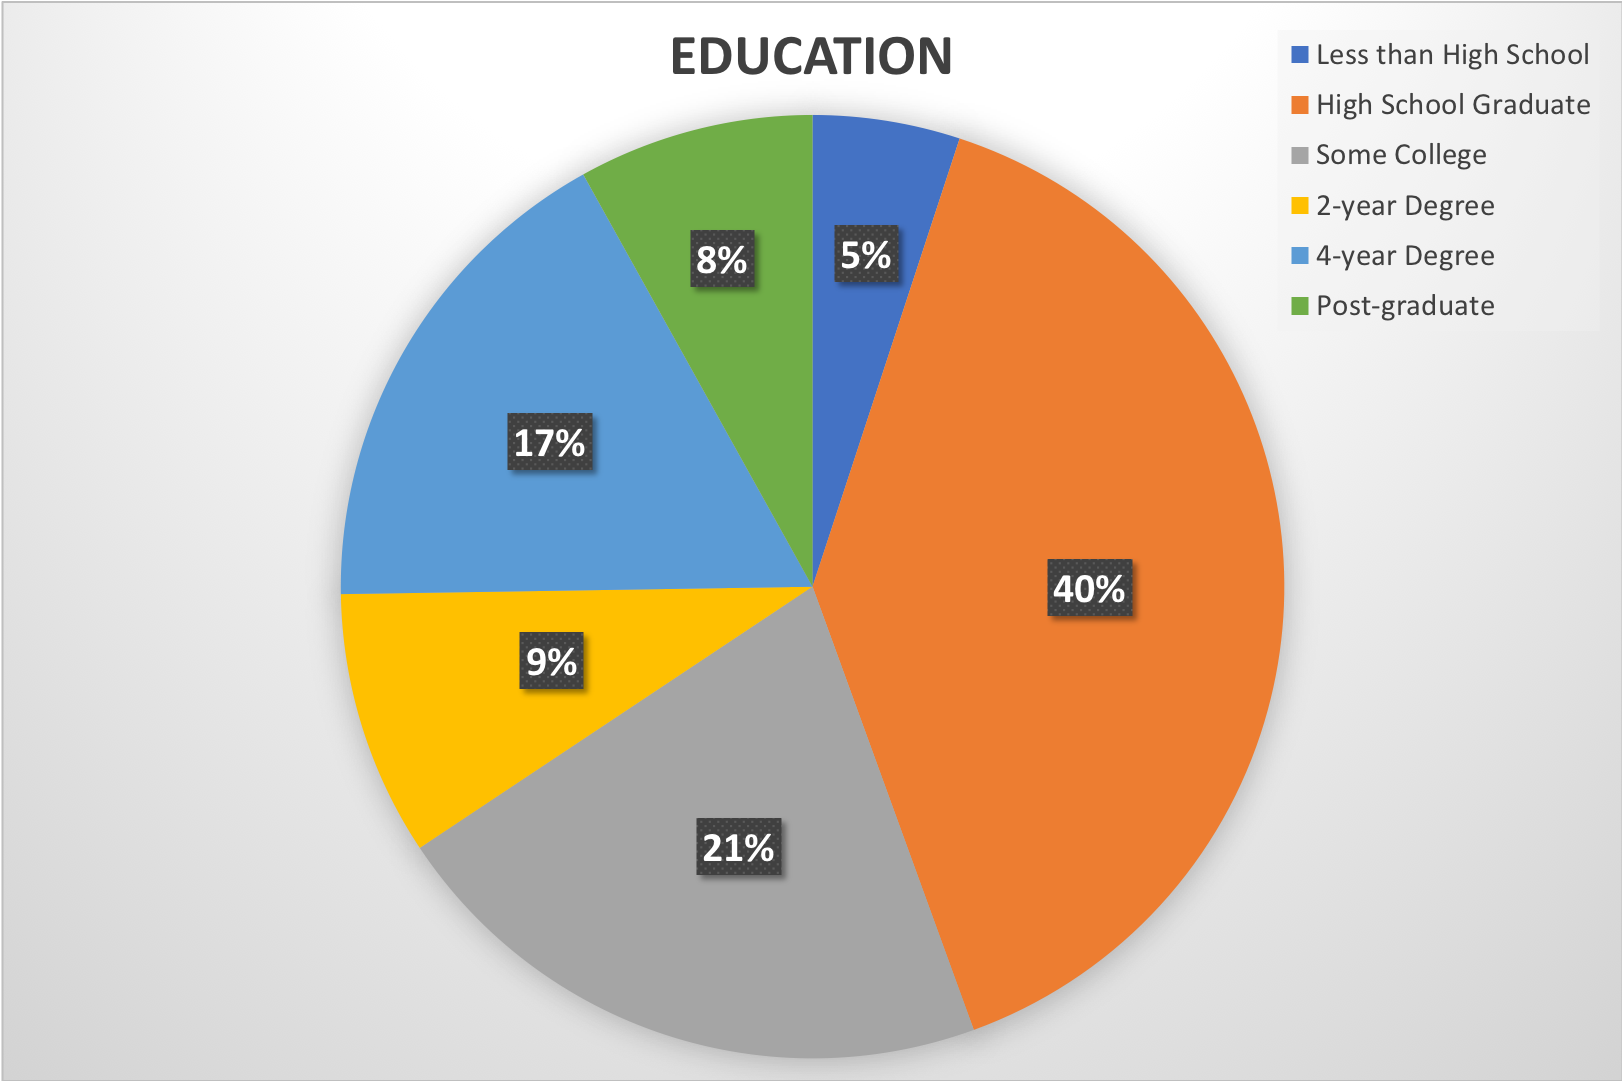 Pie chart showing results of an online experiment showing percentages of people who could recognize a native ad broken out by level of education completed: 5% Less than High School, 40% High School Graduate, 21% Some College, 9% 2-year Degree, 17% 4-year Degree, 8% Post-graduate.